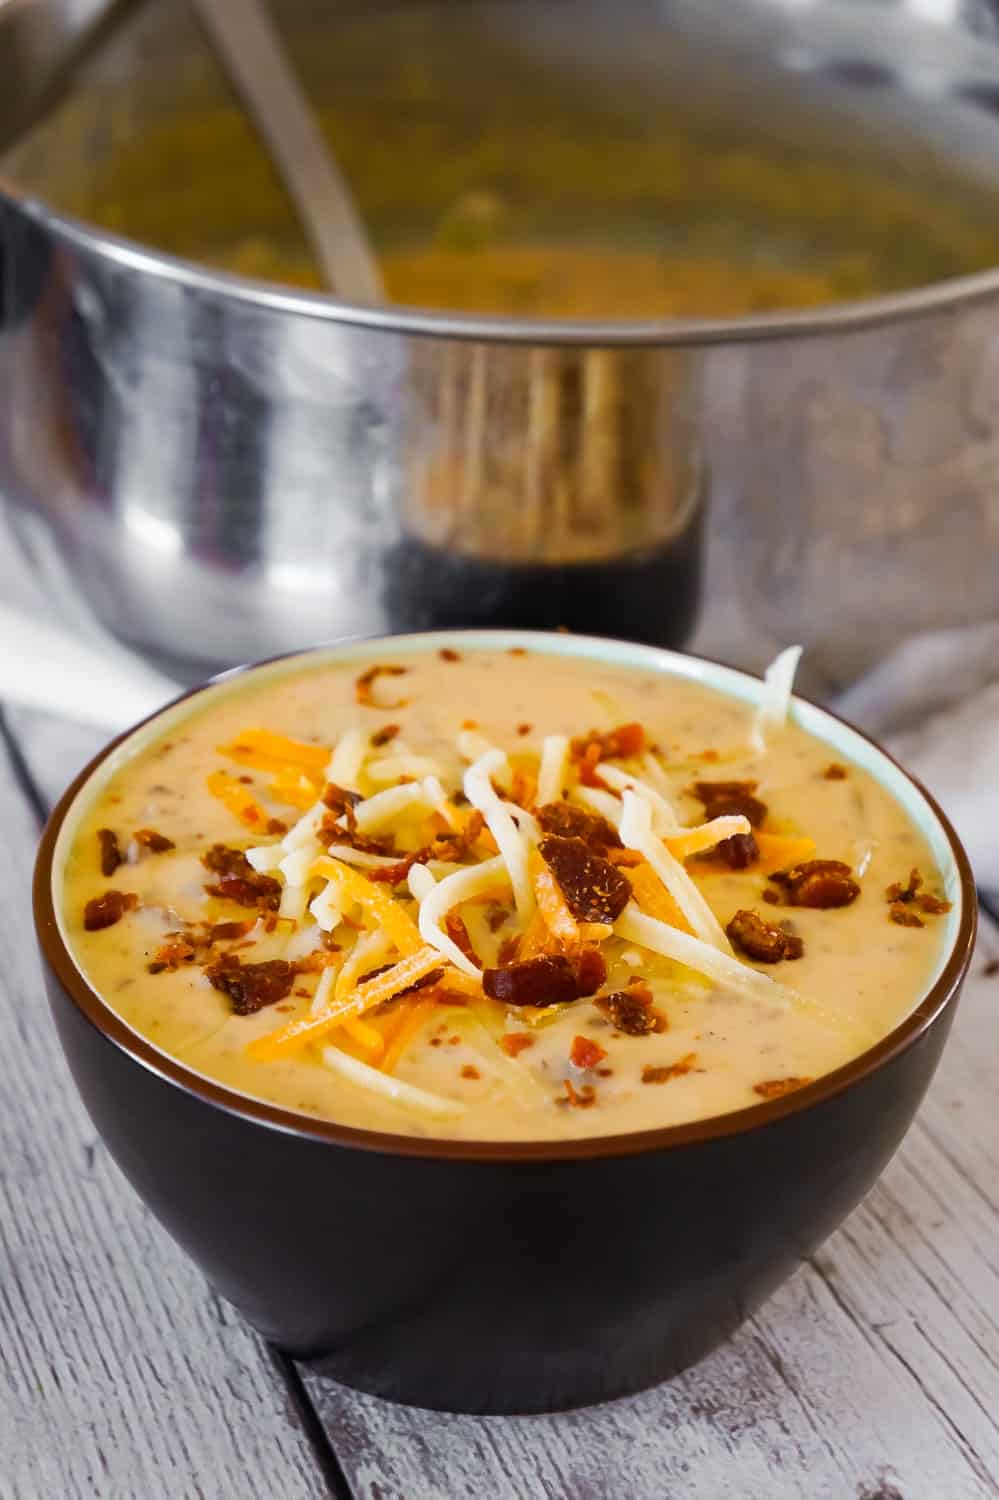 Bacon Cheeseburger Soup is a hearty soup recipe that can be whipped up in just fifteen minutes. This tasty dish made with Campbell's Cream of Bacon soup and Campbell's Cheddar Cheese soup, is loaded with ground beef, real bacon bits and cheddar cheese.